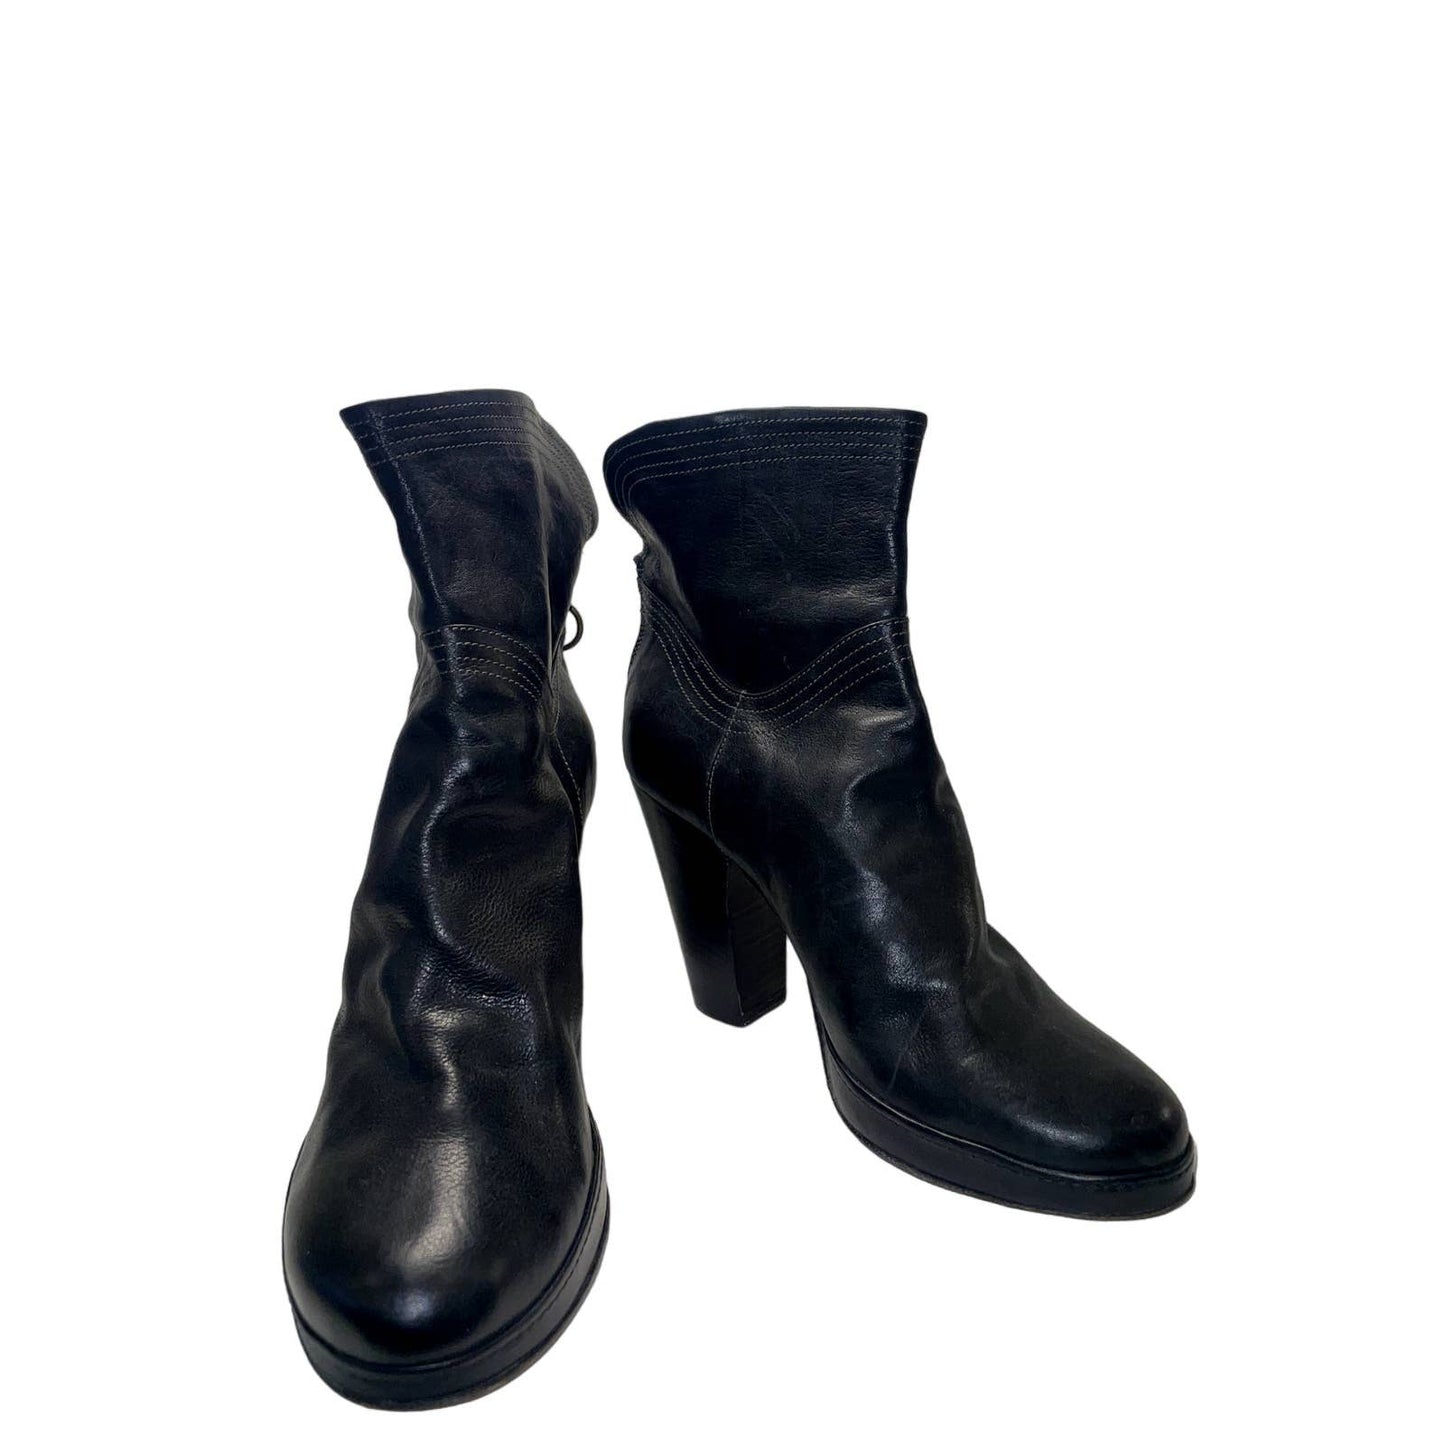 Fiorentini & Baker Ankle Boots